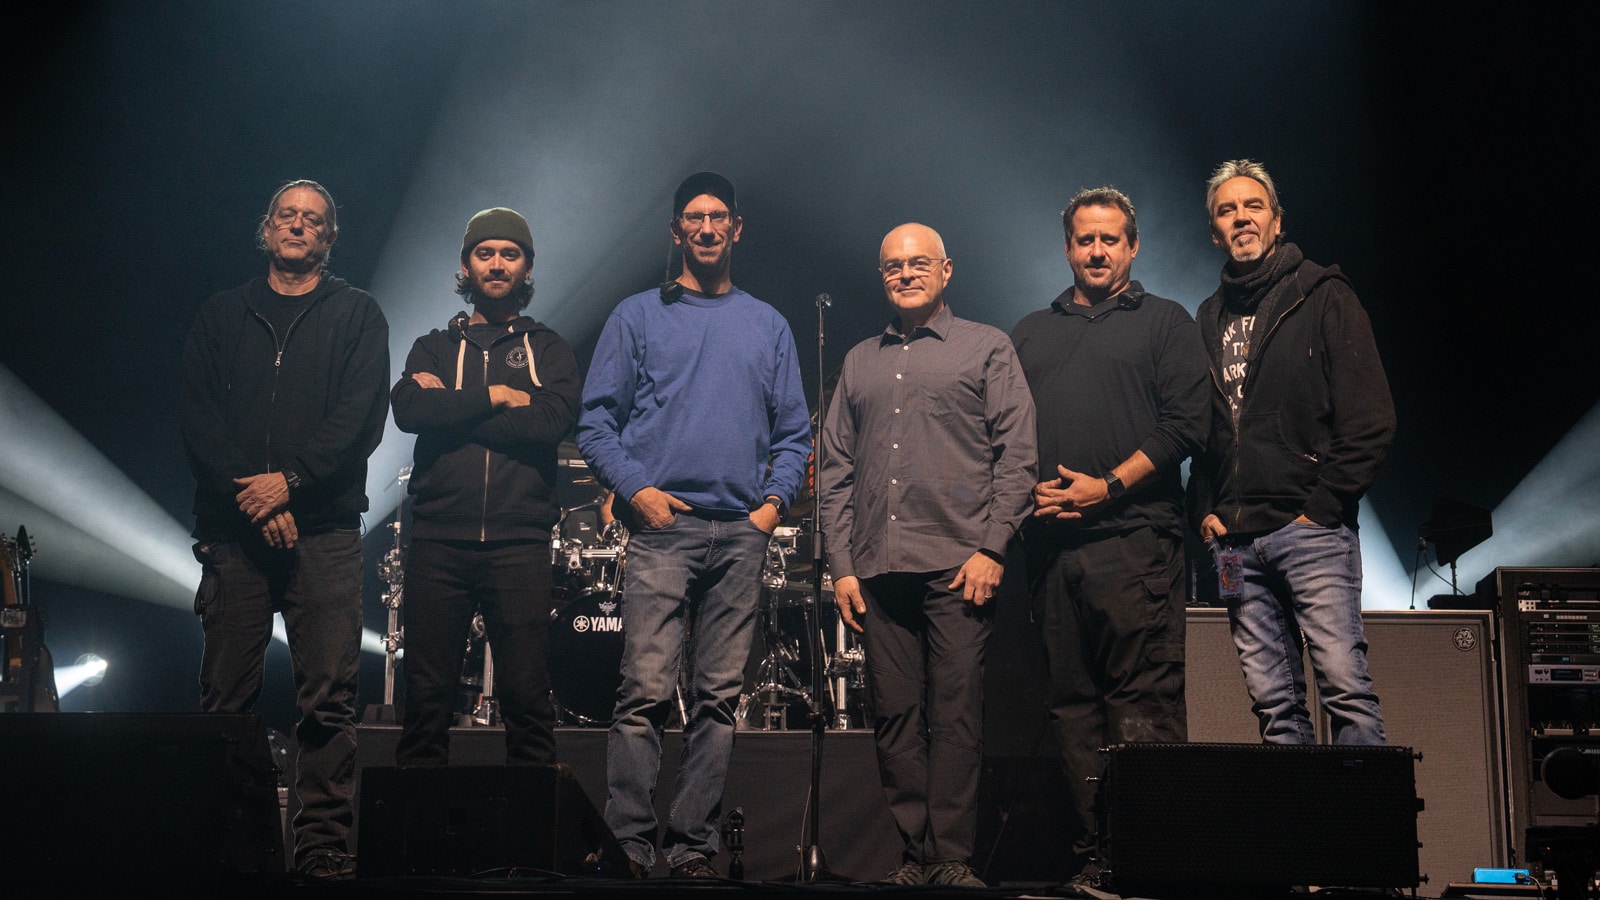 (L-R) Greg Botimer, Monitor and RF Technician; Ethan Chase, Stage Left PA Technician; Tom Lyon, FOH Engineer; Ian Kuhn, Monitor Engineer; Paul “Pablo” White, System Engineer and Stage Right PA Technician; Joe Lawlor, Archival Recording Engineer